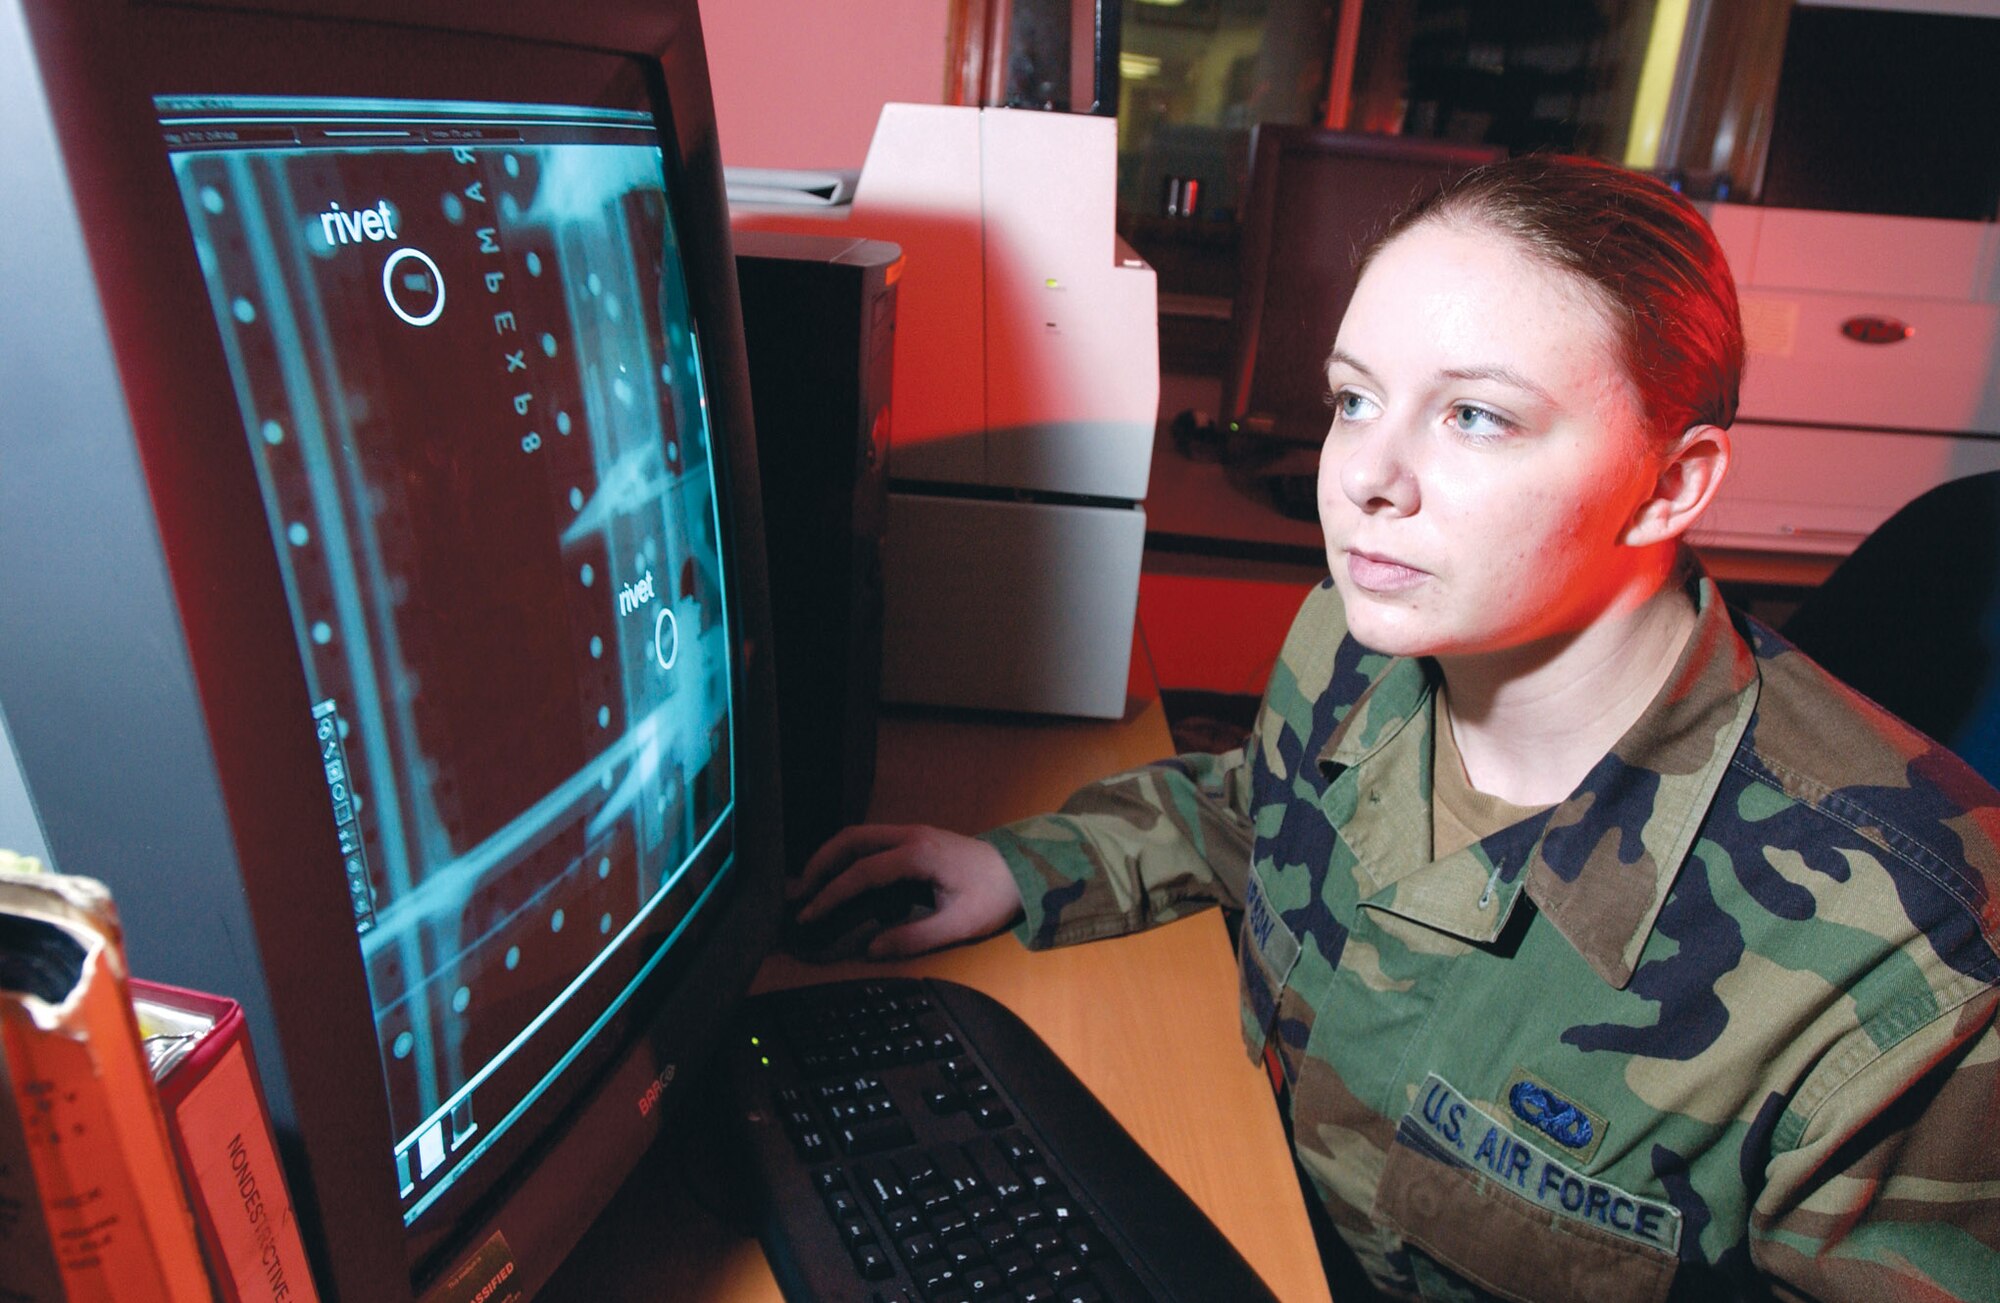 Senior Airman Jeri Thompson studies a digital X-ray from an aircraft part at Elmendorf Air Force Base, Alaska, on July 10. By switching from film to digital X-rays to analyze aircraft, the 3rd Equipment Maintenance Squadron is saving the Air Force more than $200,000 a year and no longer produces hazardous waste from processing film. Airman Thompson is a nondestructive inspection laboratory technician at the squadron. (U.S. Air Force photo/Tech. Sgt. Keith Brown)